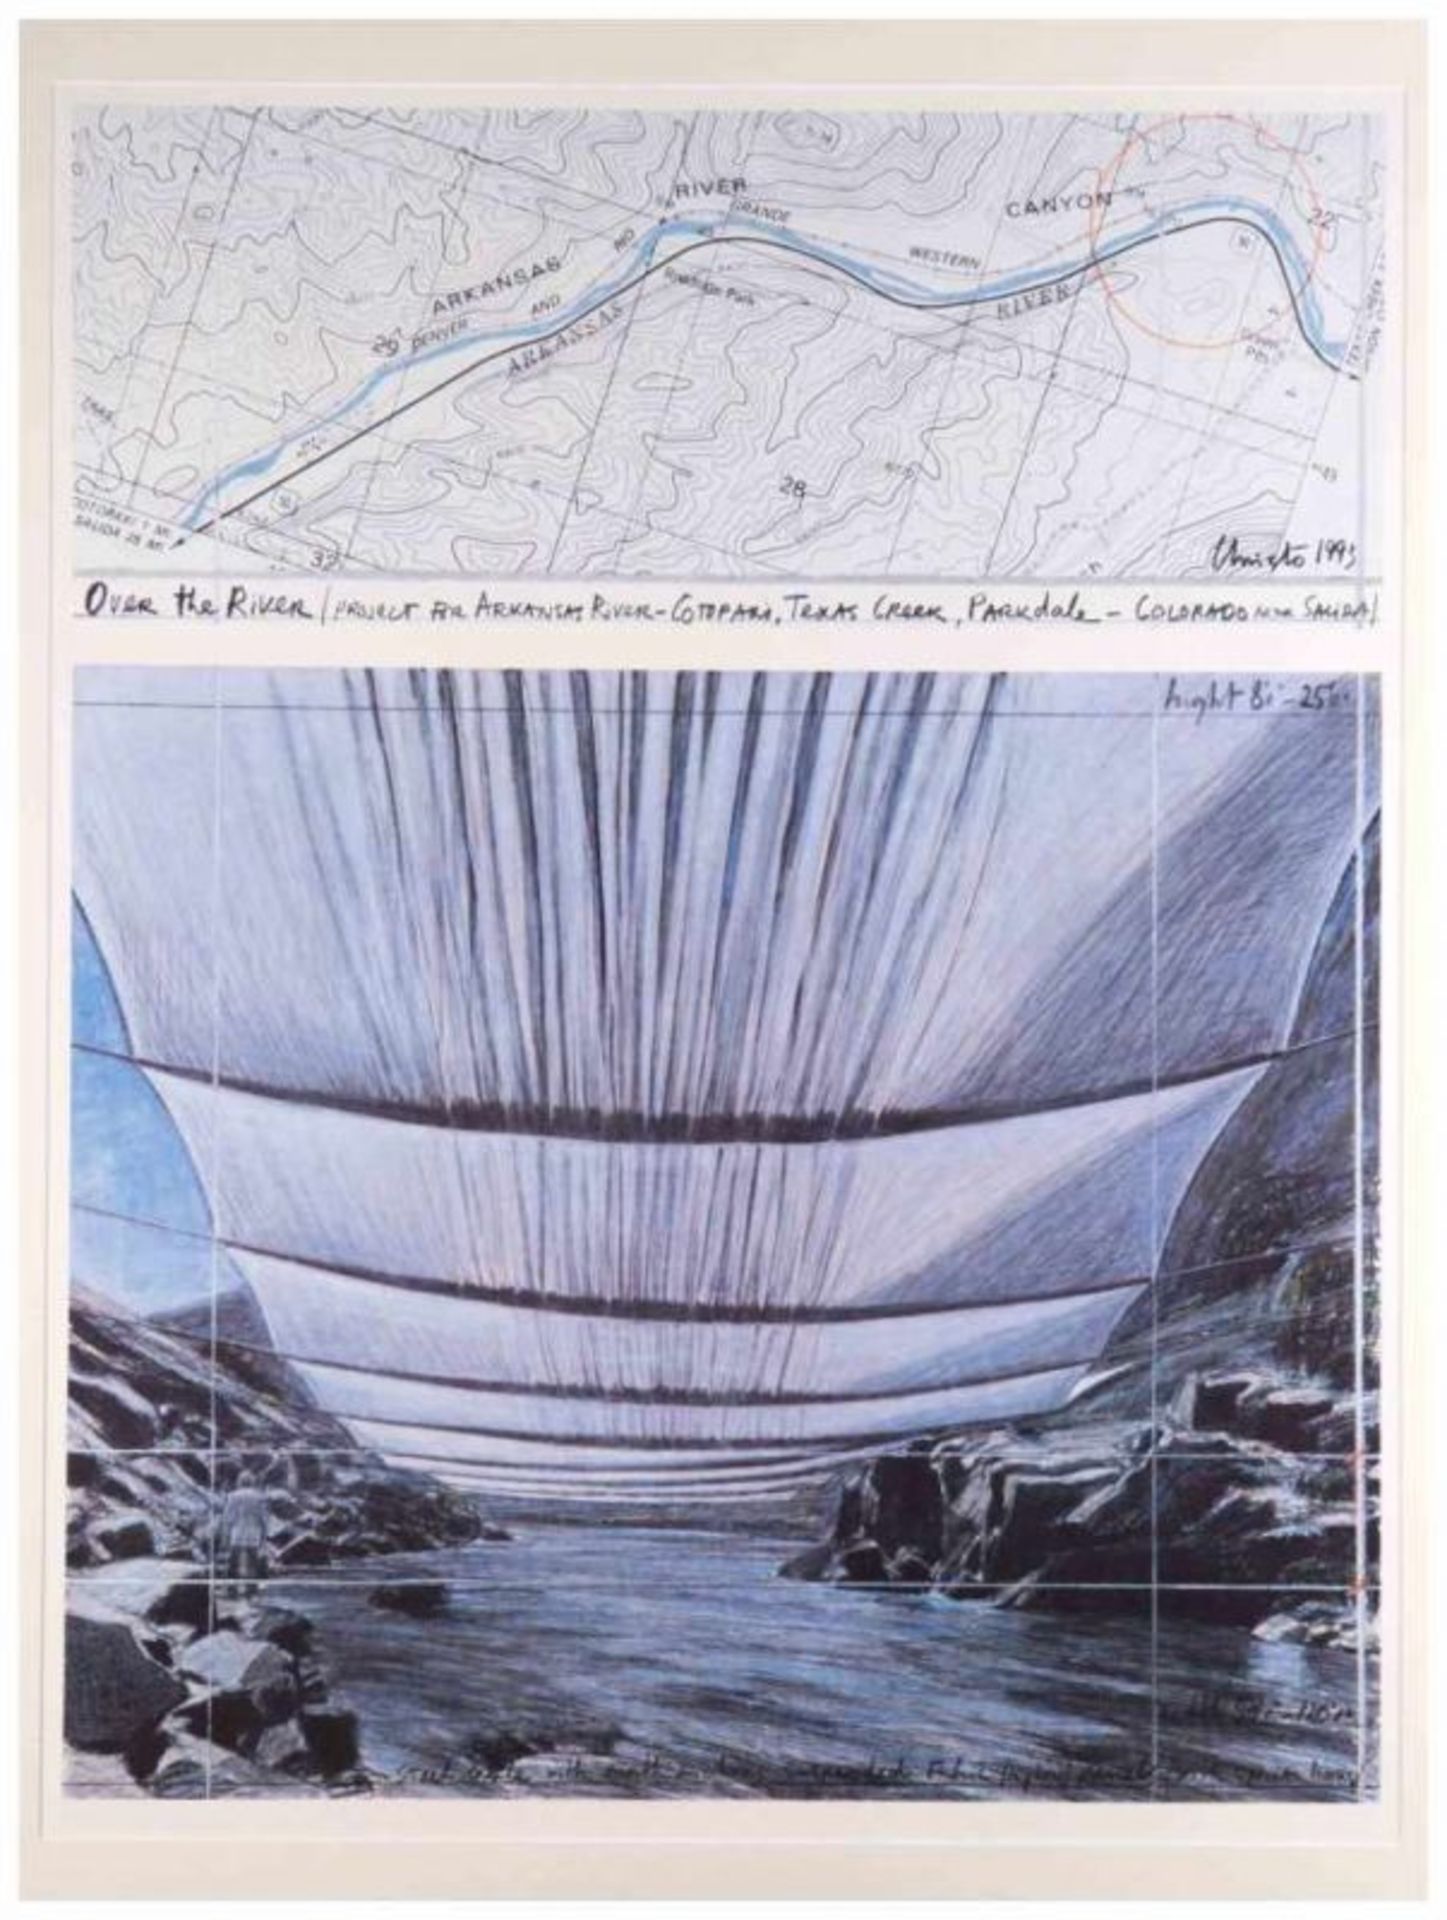 CHRISTO (1935) - "Over the River"(project for Arkansas River-Cotopaxi, Texas Creek, [...] - Image 2 of 8